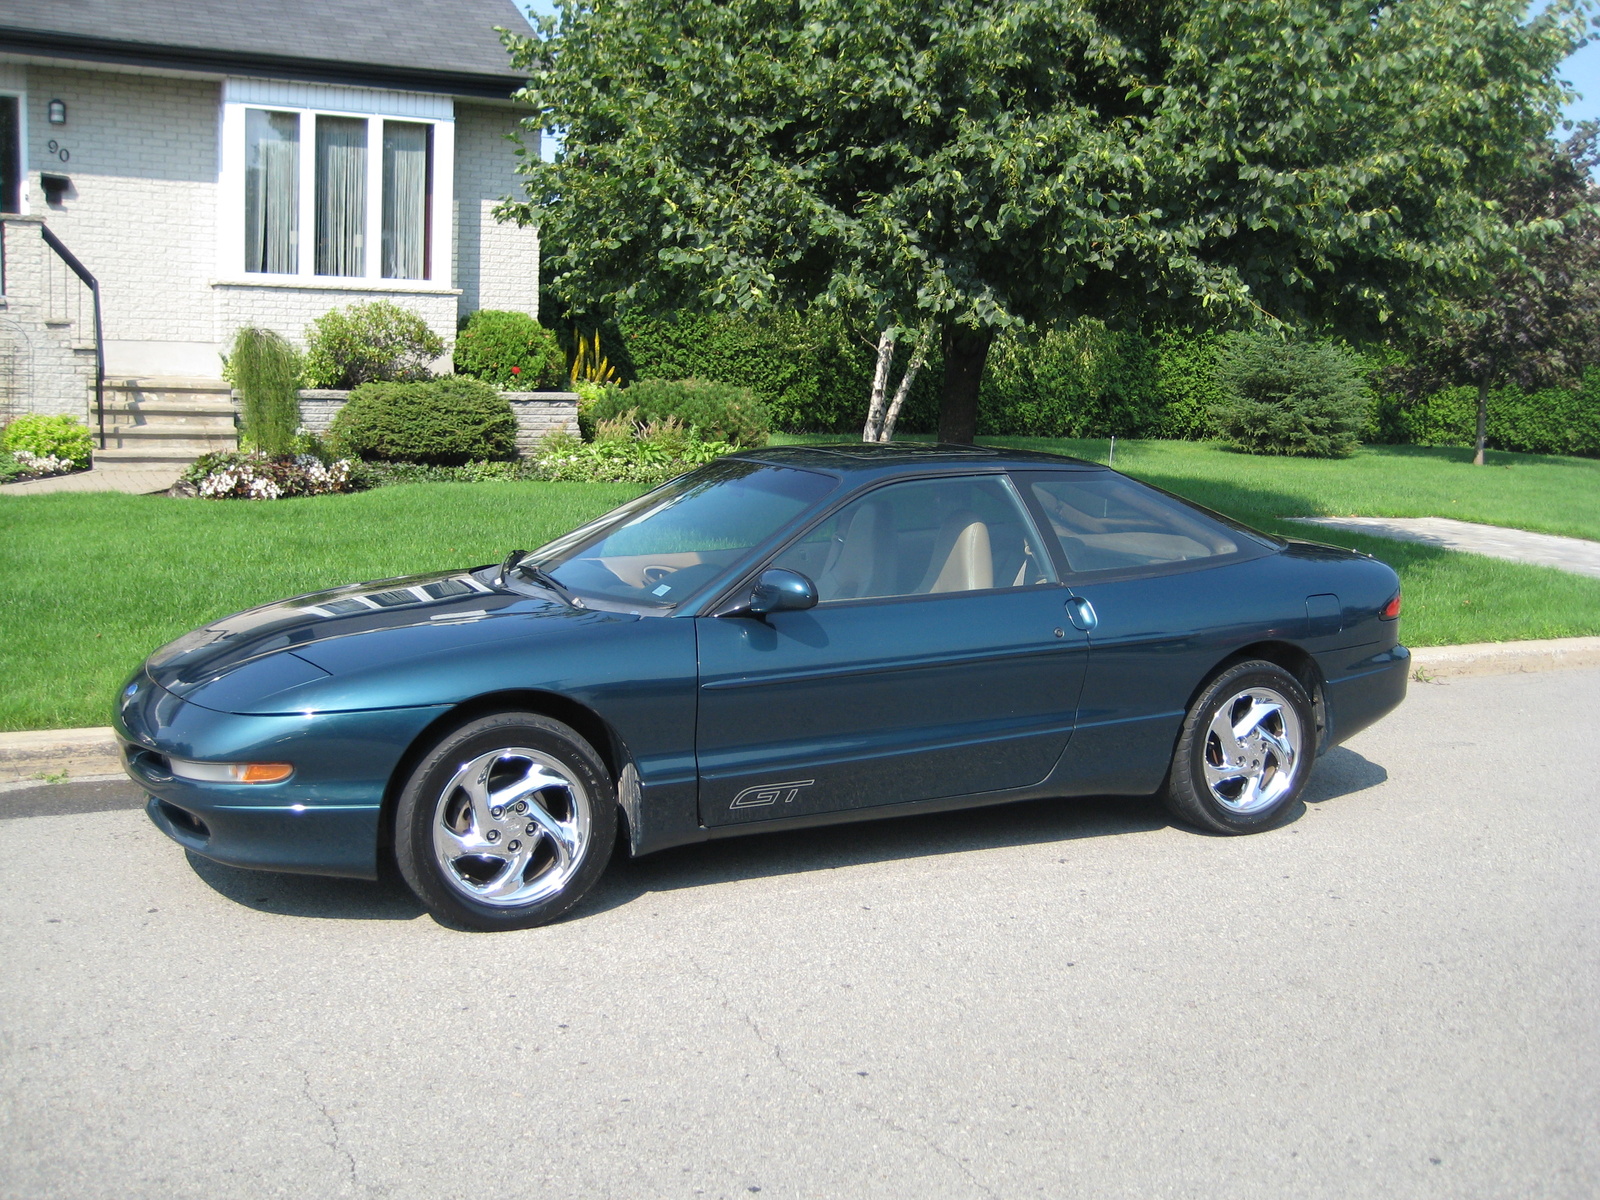 1996 Ford probe gt common problems #2